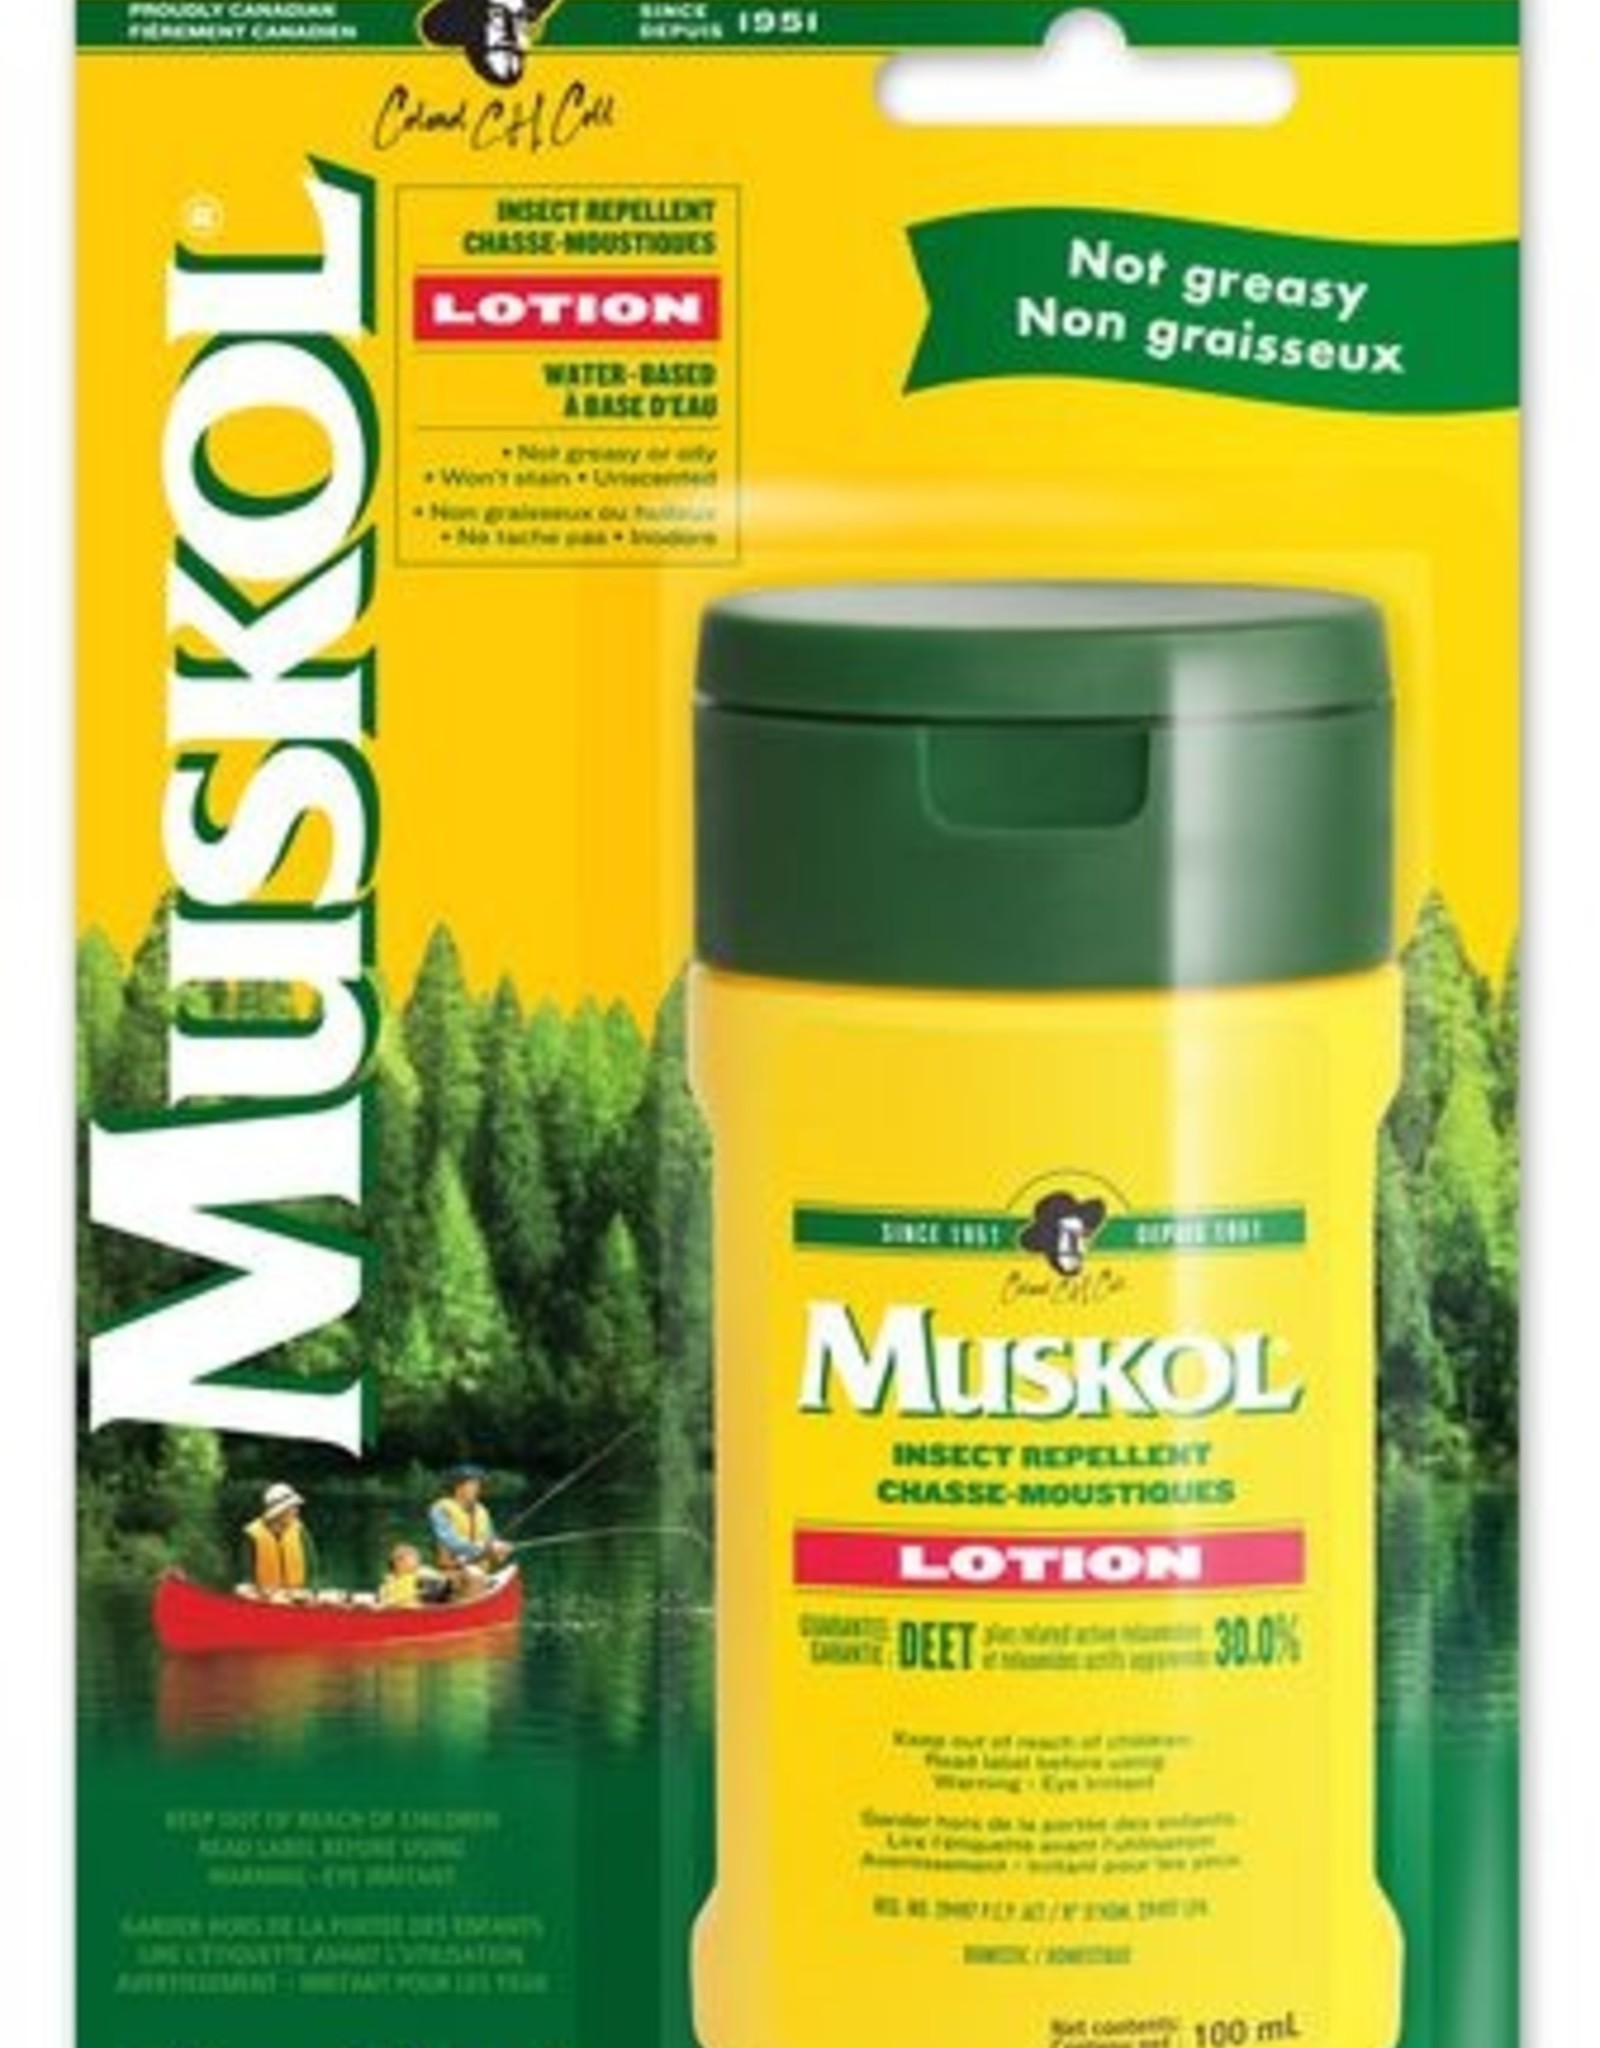 Muskol Insect Repellent Lotion 100ml